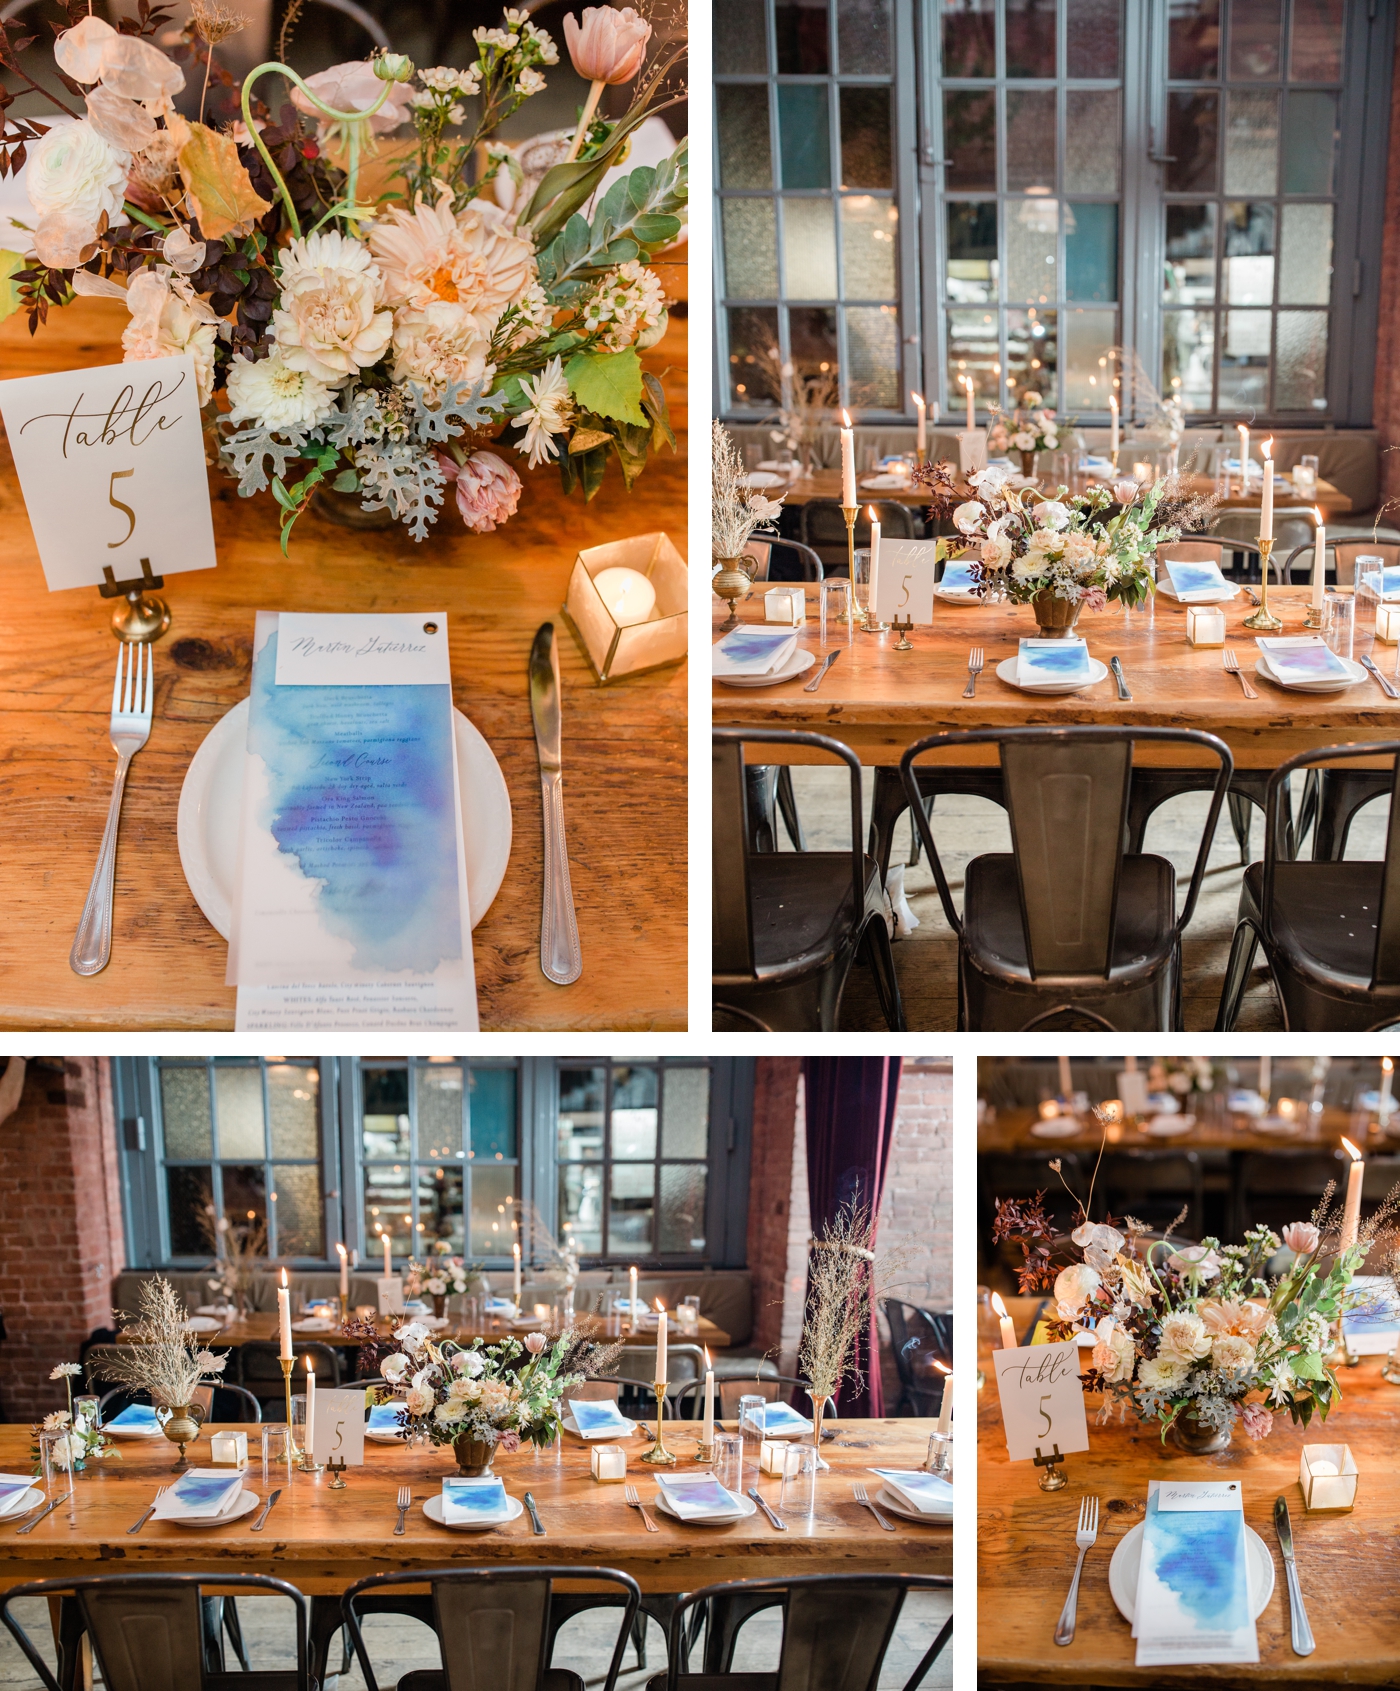 Ingrid & Martin’s High-Fashion and Indigo-Inspired NYC Wedding by Verve Event Co.